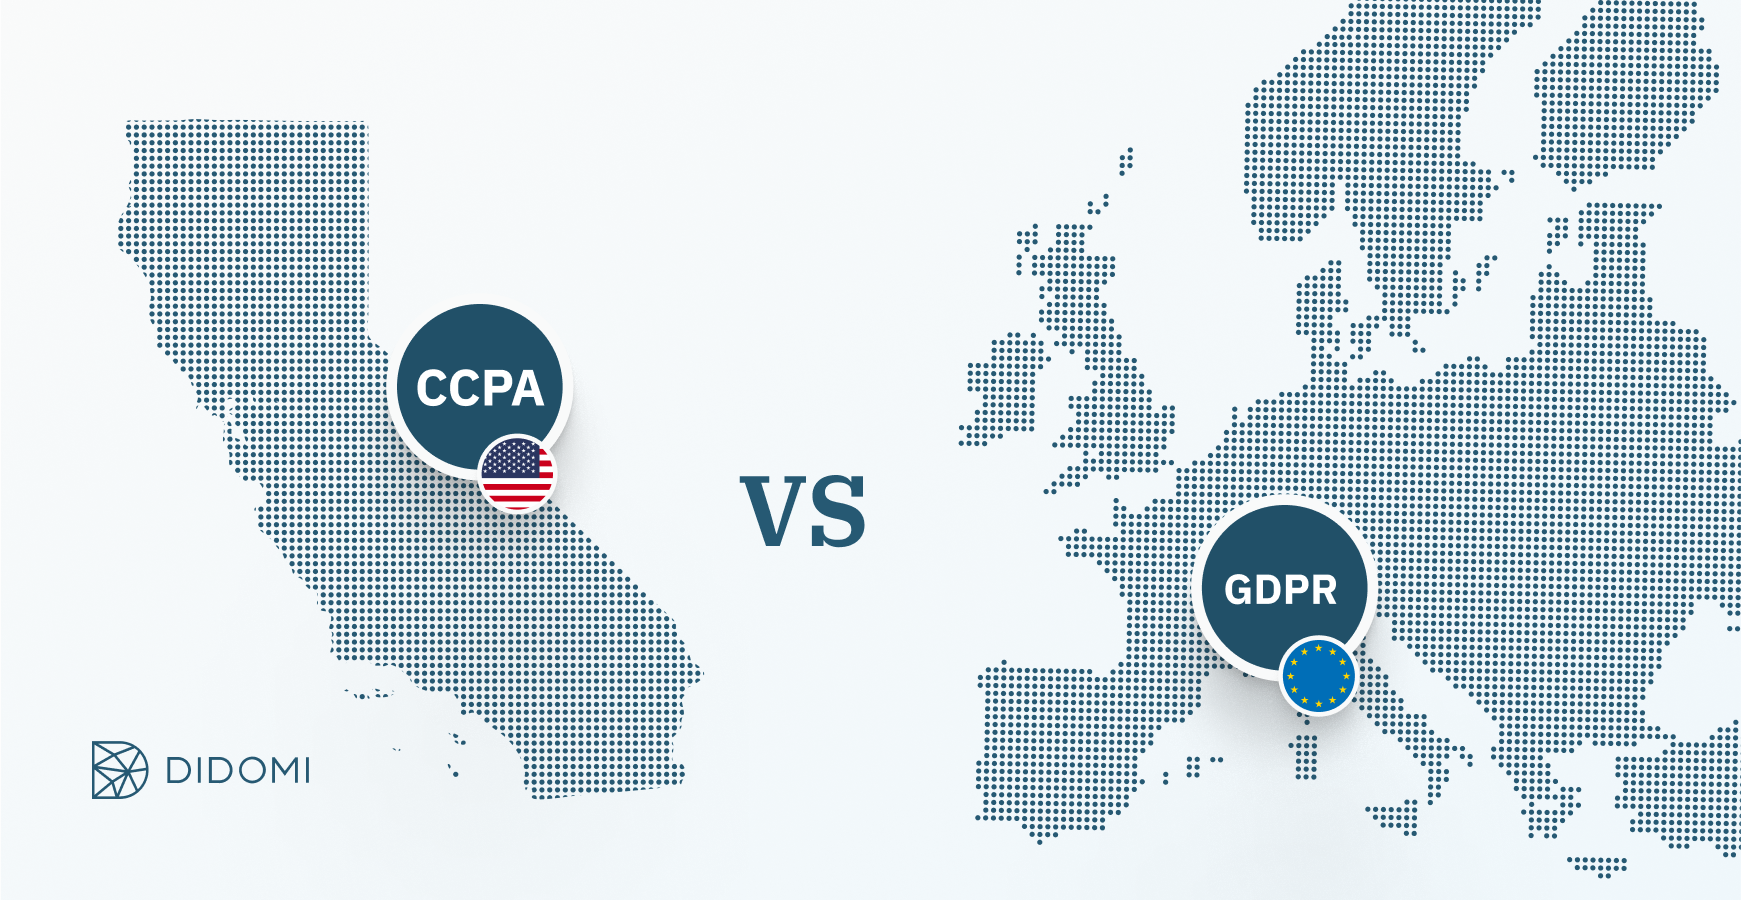 CCPA vs. GDPR Compliance: What are the Differences?